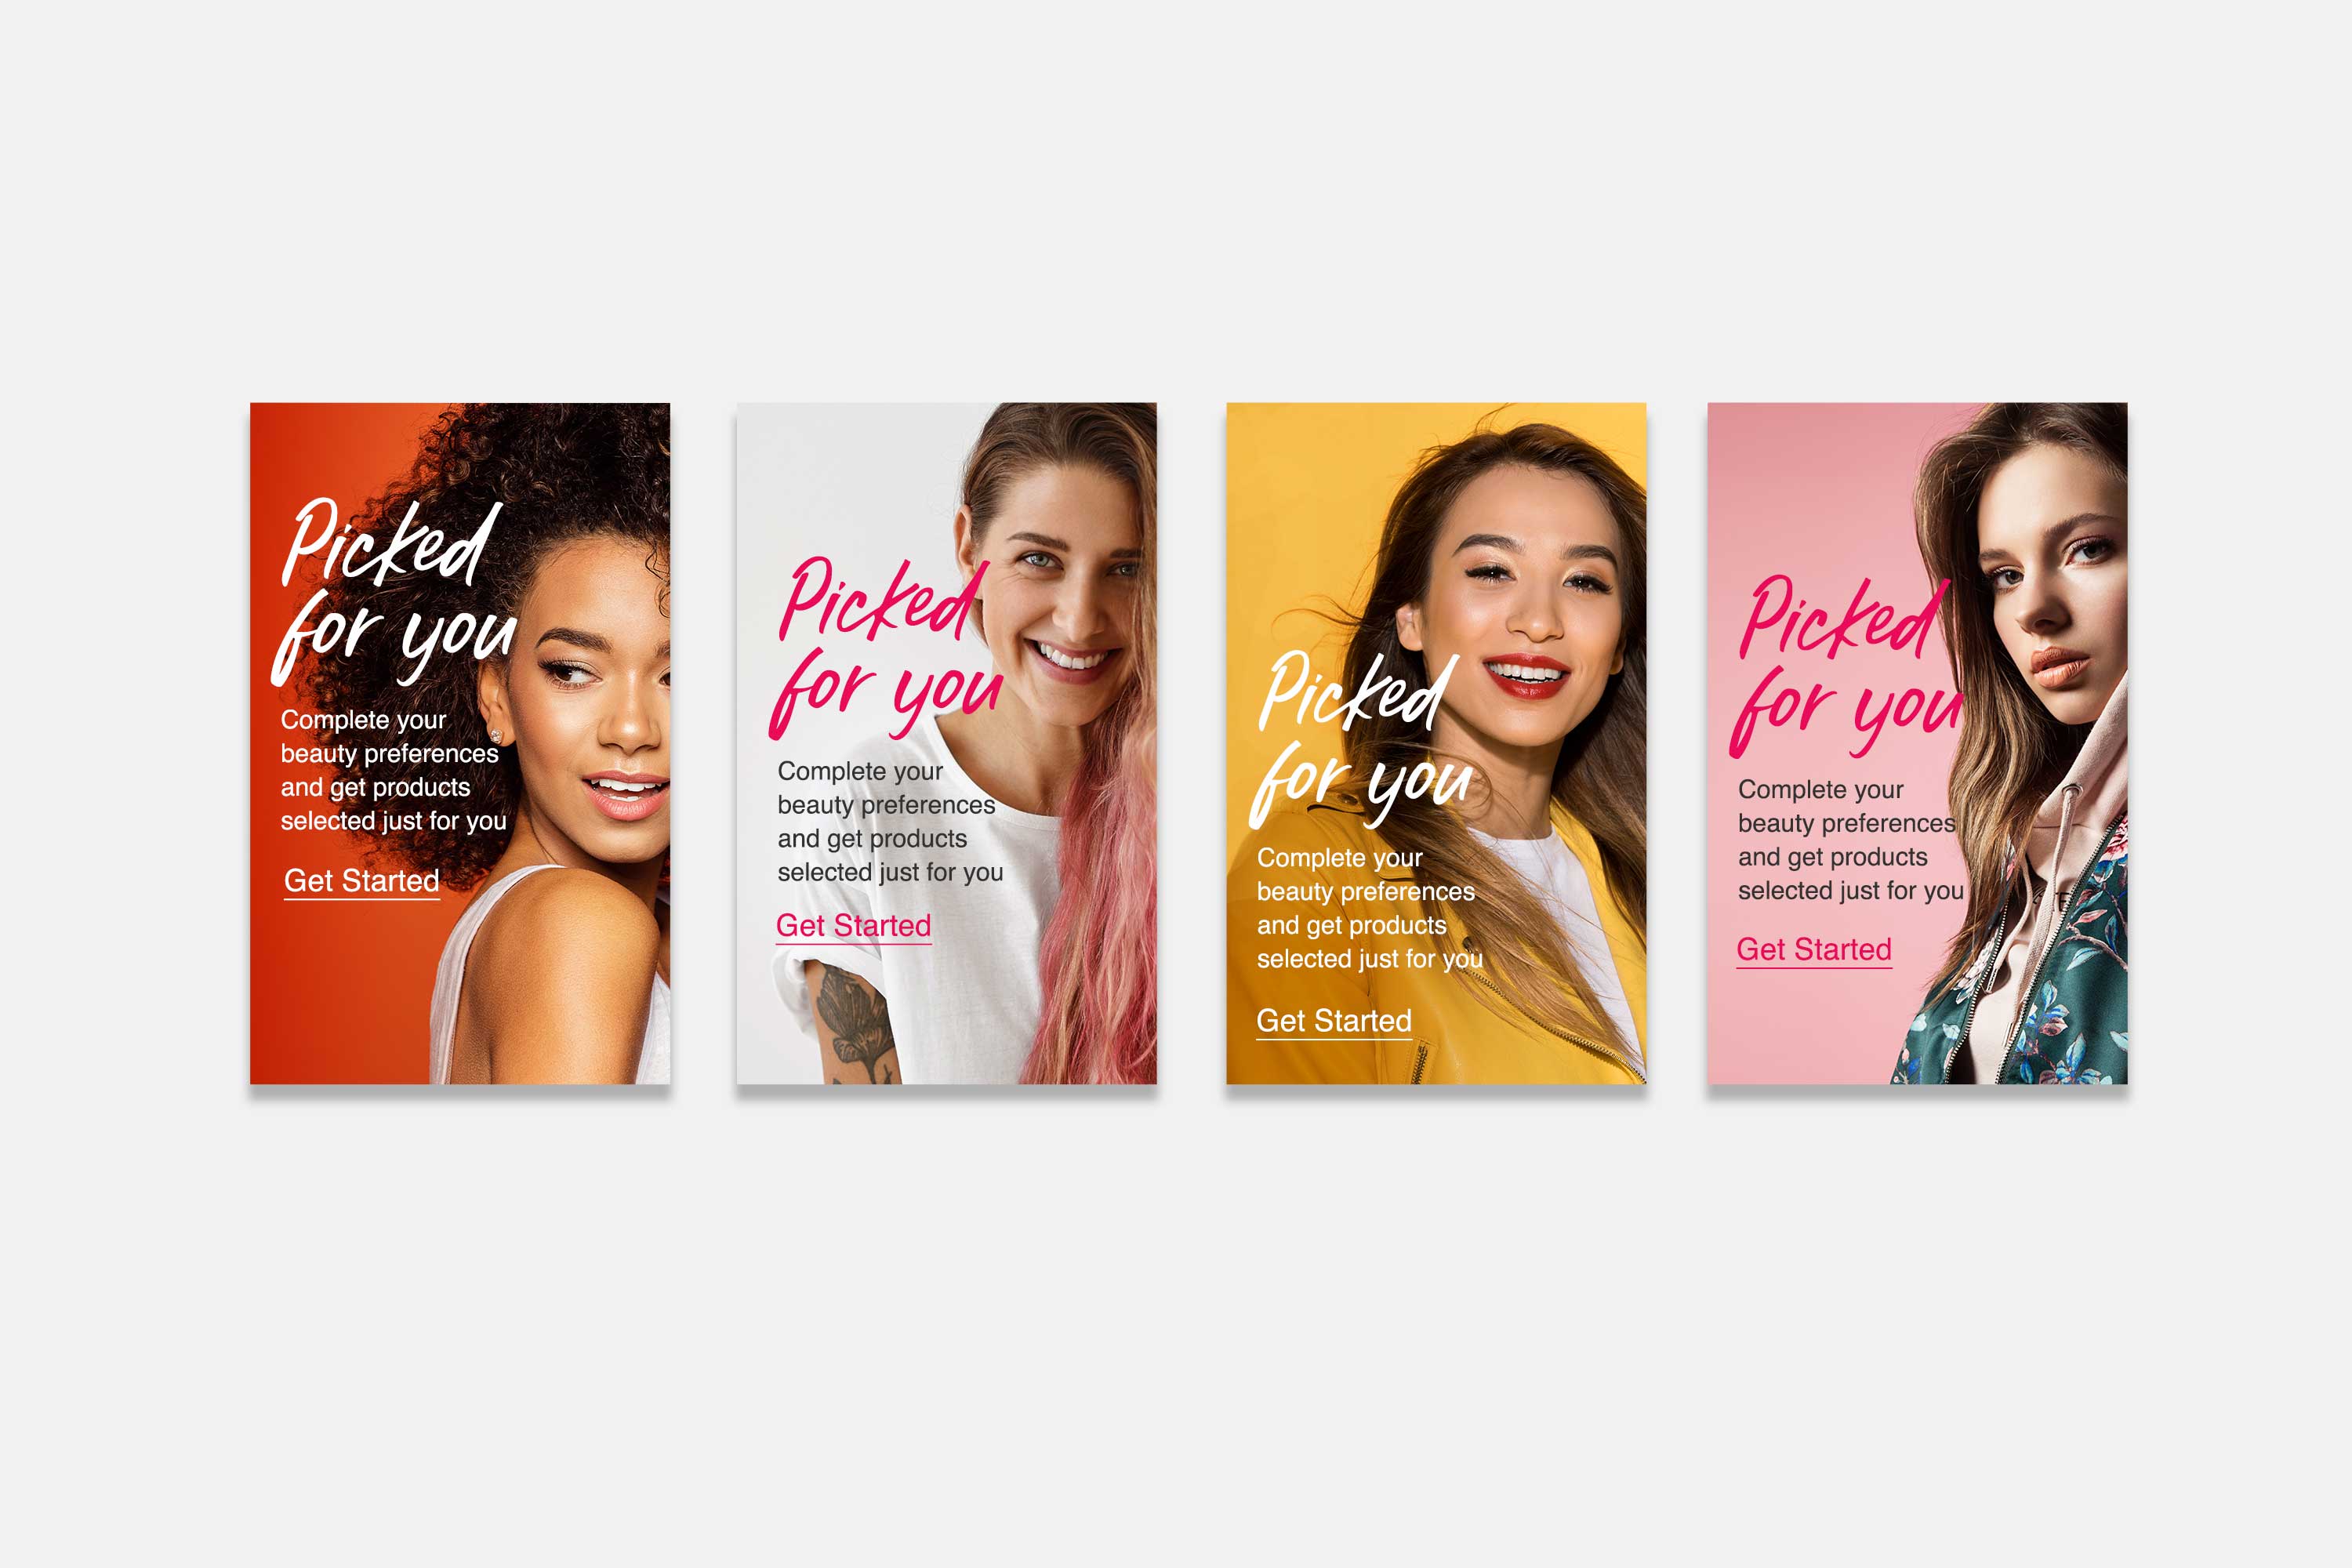 ulta beauty preferences ad placement picked for you